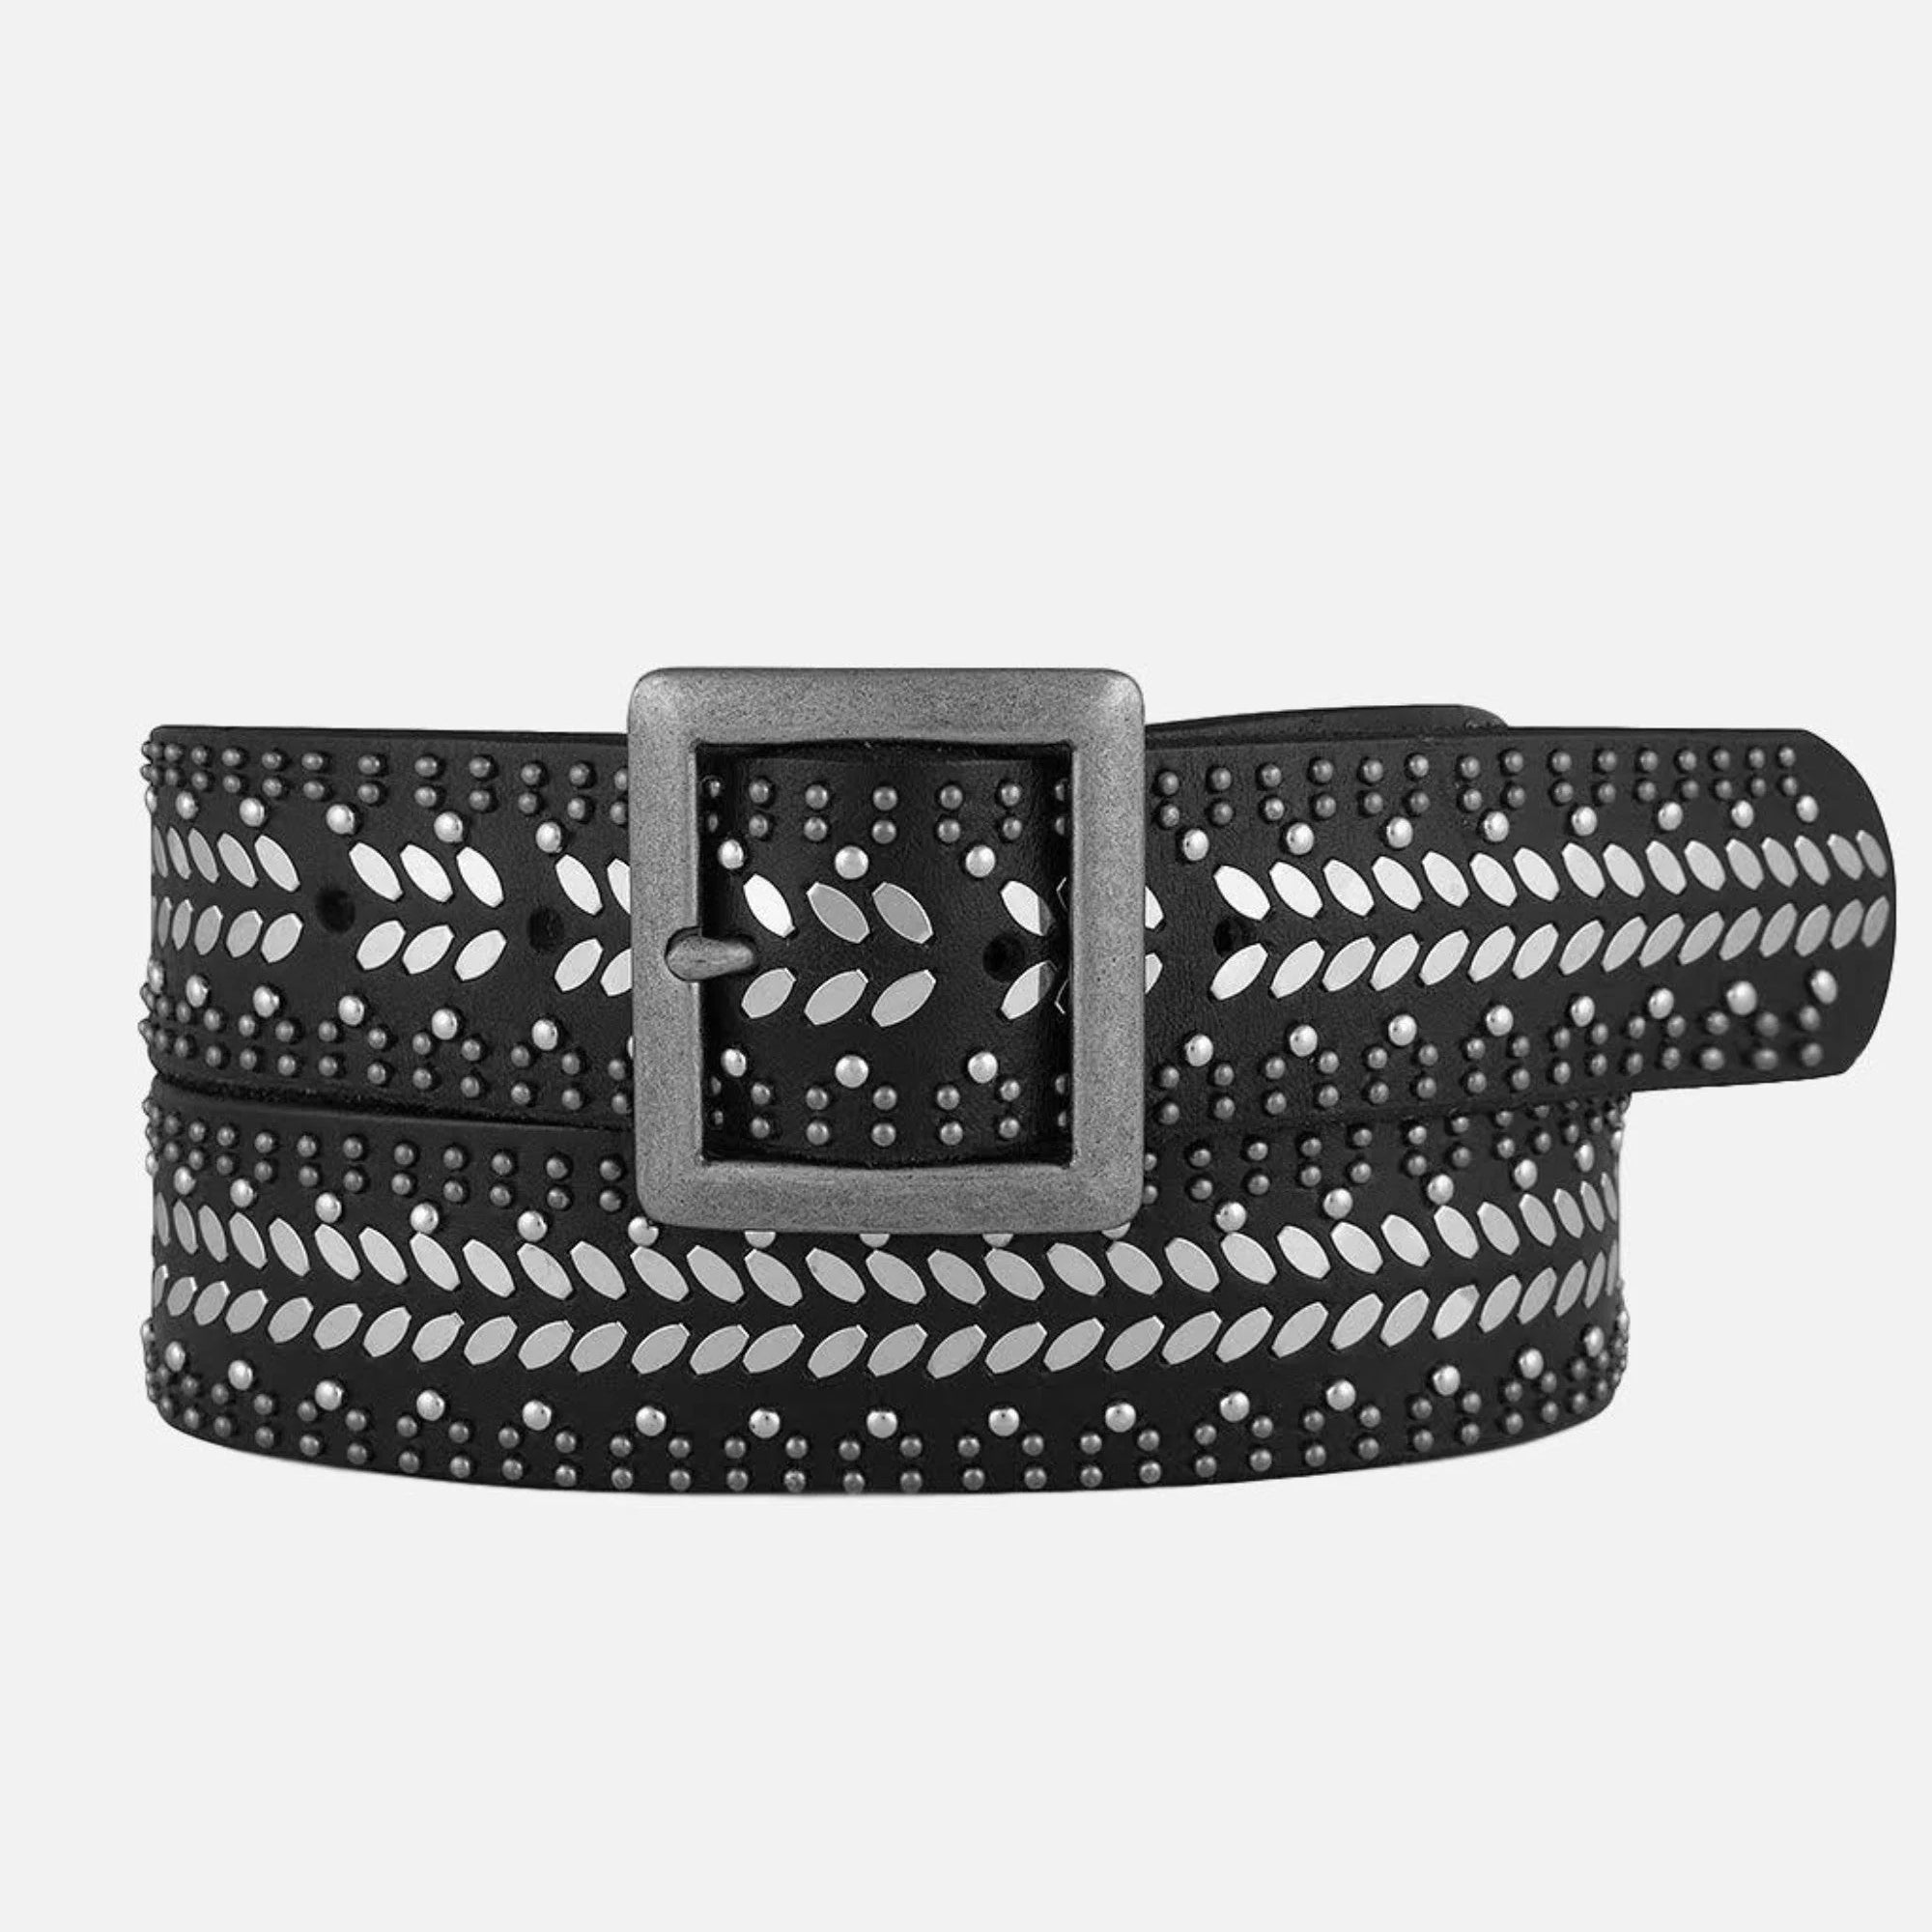 Amsterdam Heritage Women's Ezra Studded Leather Belt With Square Buckle